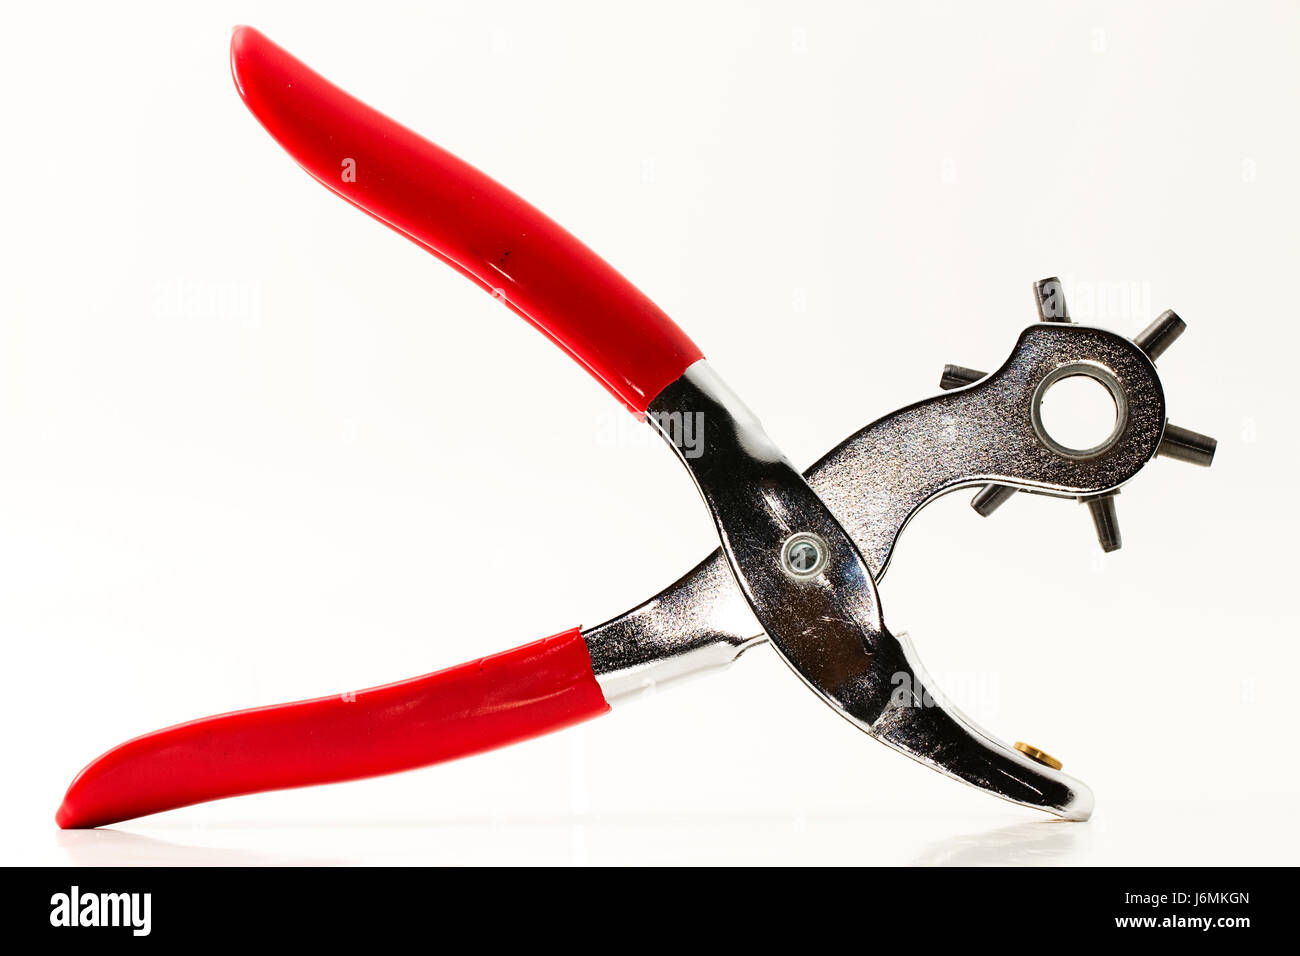 riveting pliers Stock Photo